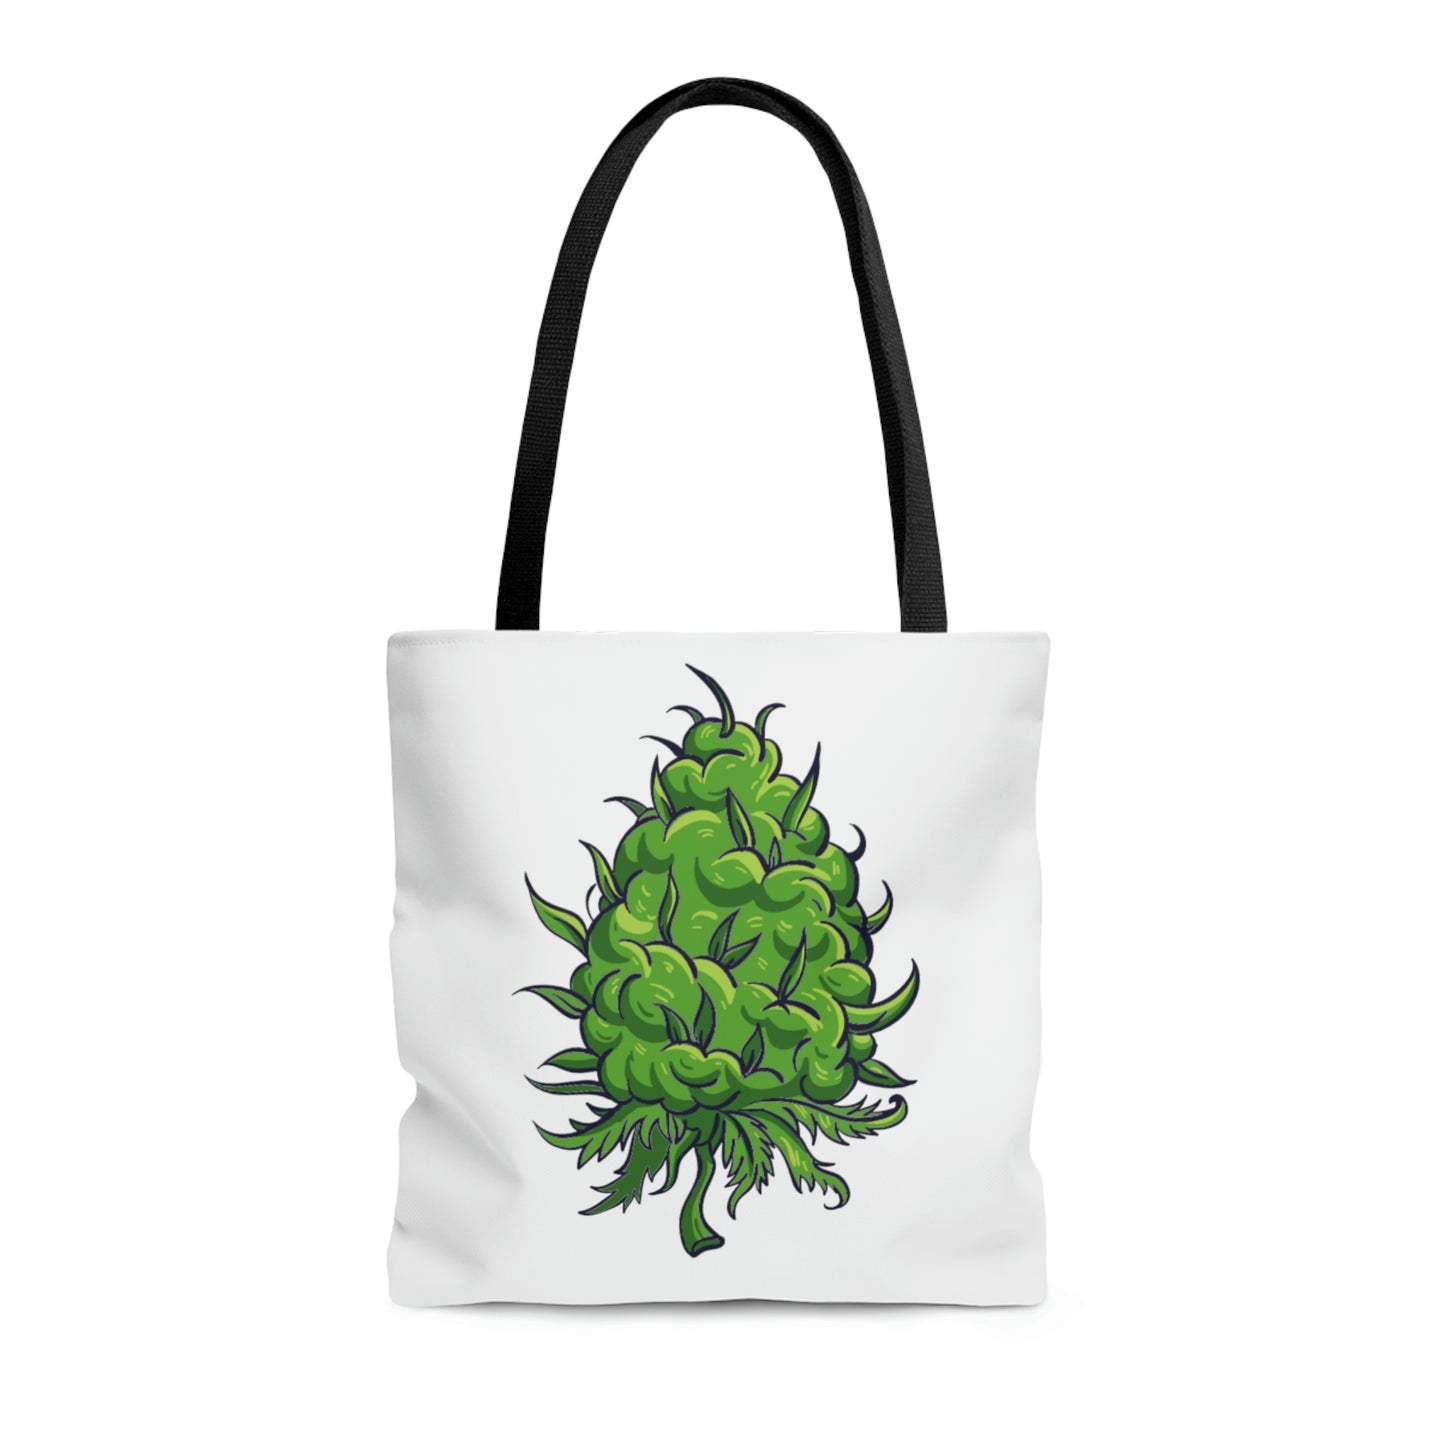 A gigantic green nug sits in the center of this masterfully designed Big Green Cannabis Nug Tote Bag